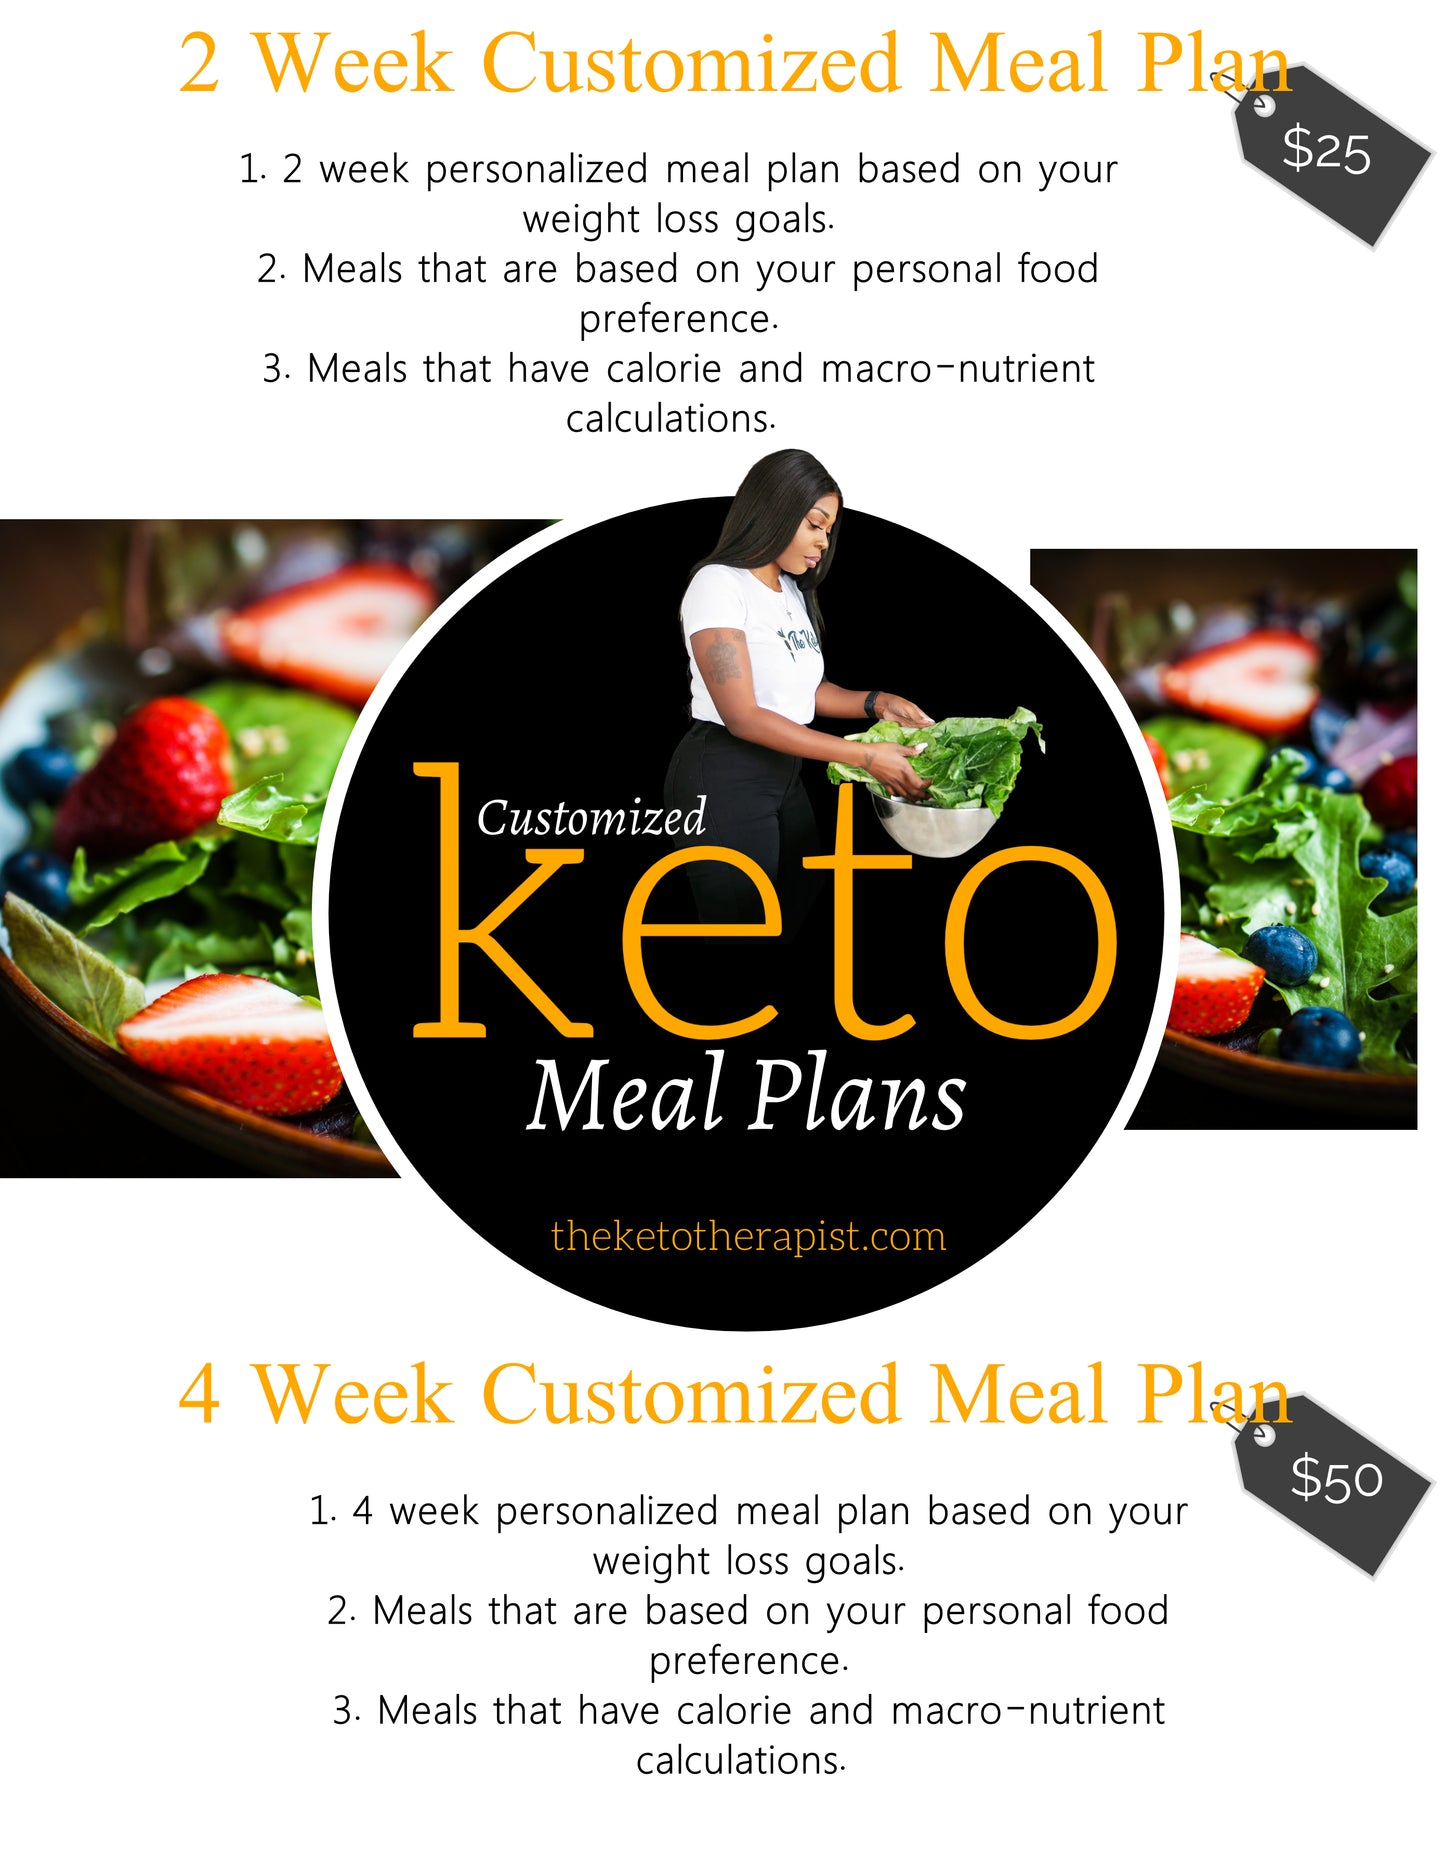 Customize Keto Meal Plans